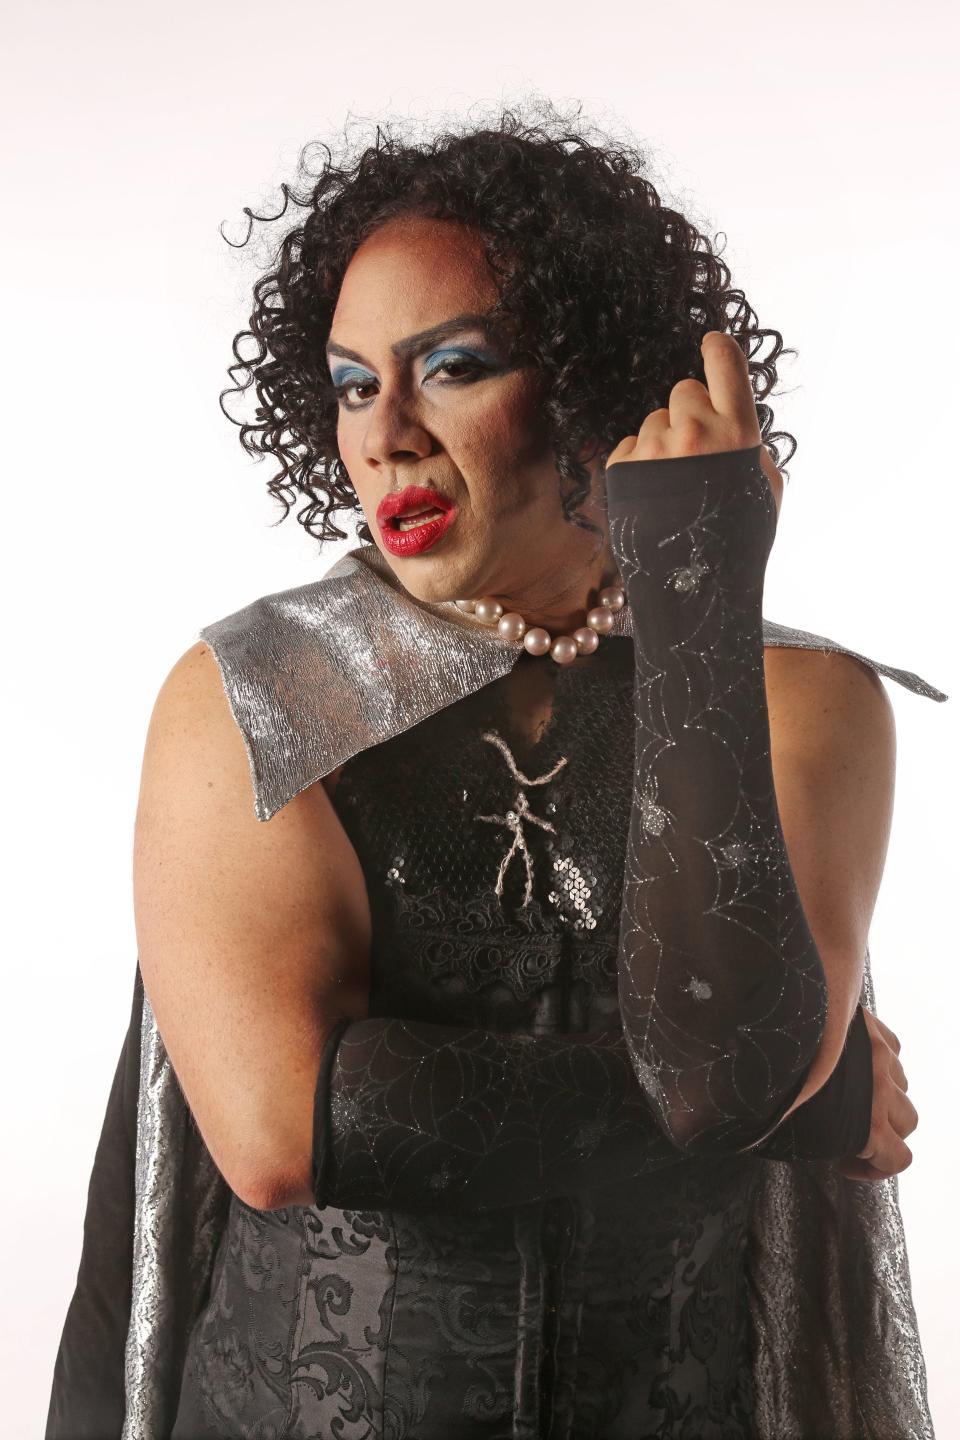 Freddie De Jesus, founder of the Lipstick Players and producer of the live production in "The Rocky Horror Picture Show Experience," has long portrayed Dr. Frank N. Furter, an alien transvestite from the planet Transsexual.